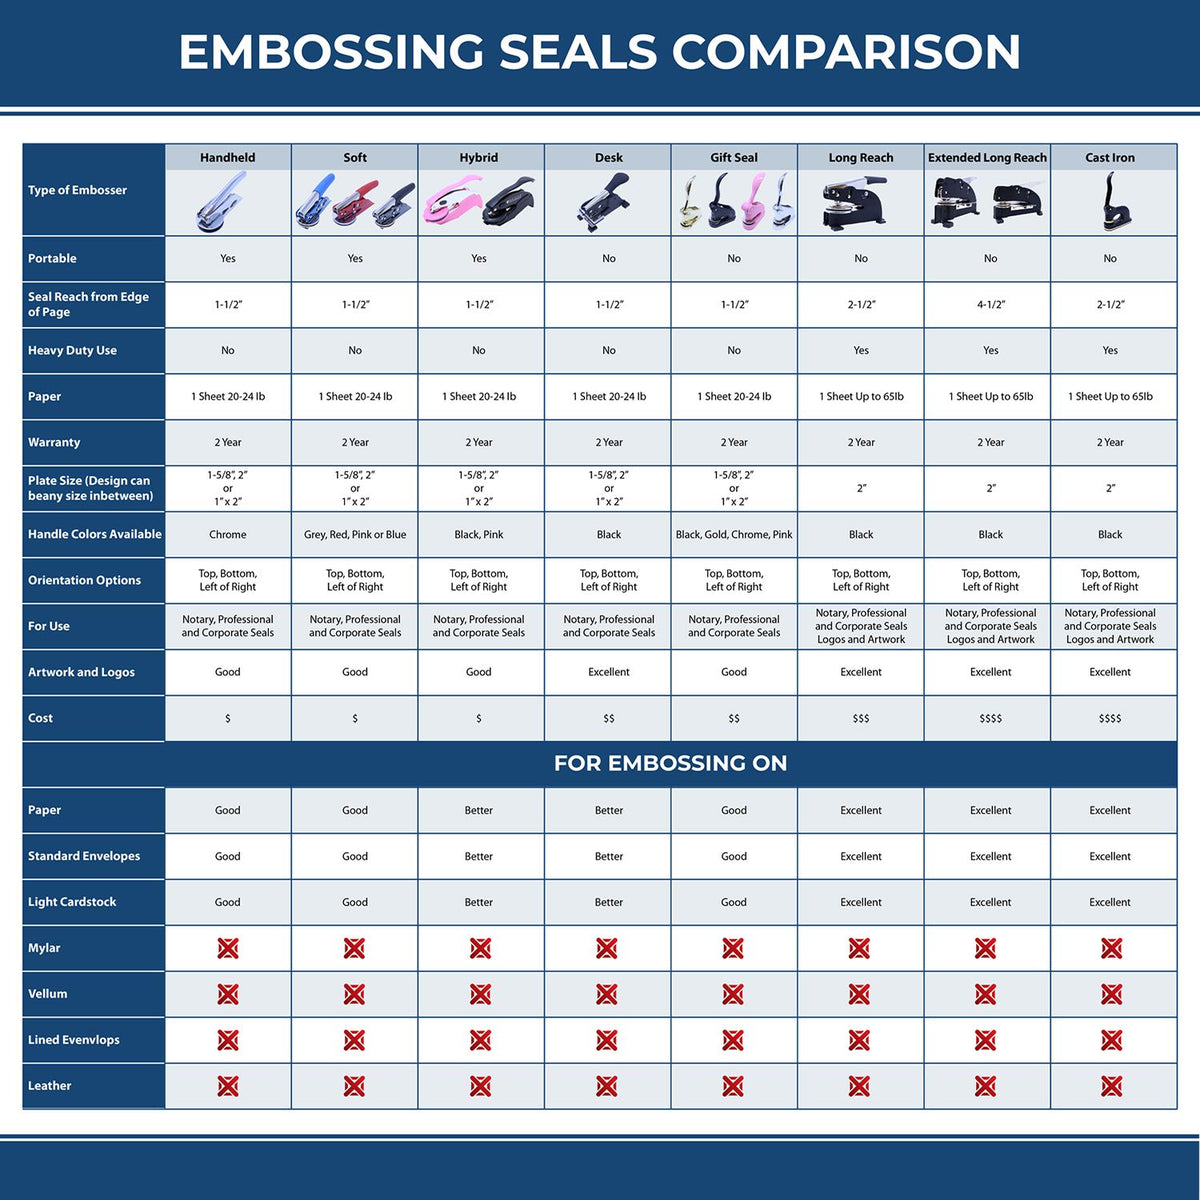 A comparison chart for the different types of mount models available for the Handheld Arizona Architect Seal Embosser.